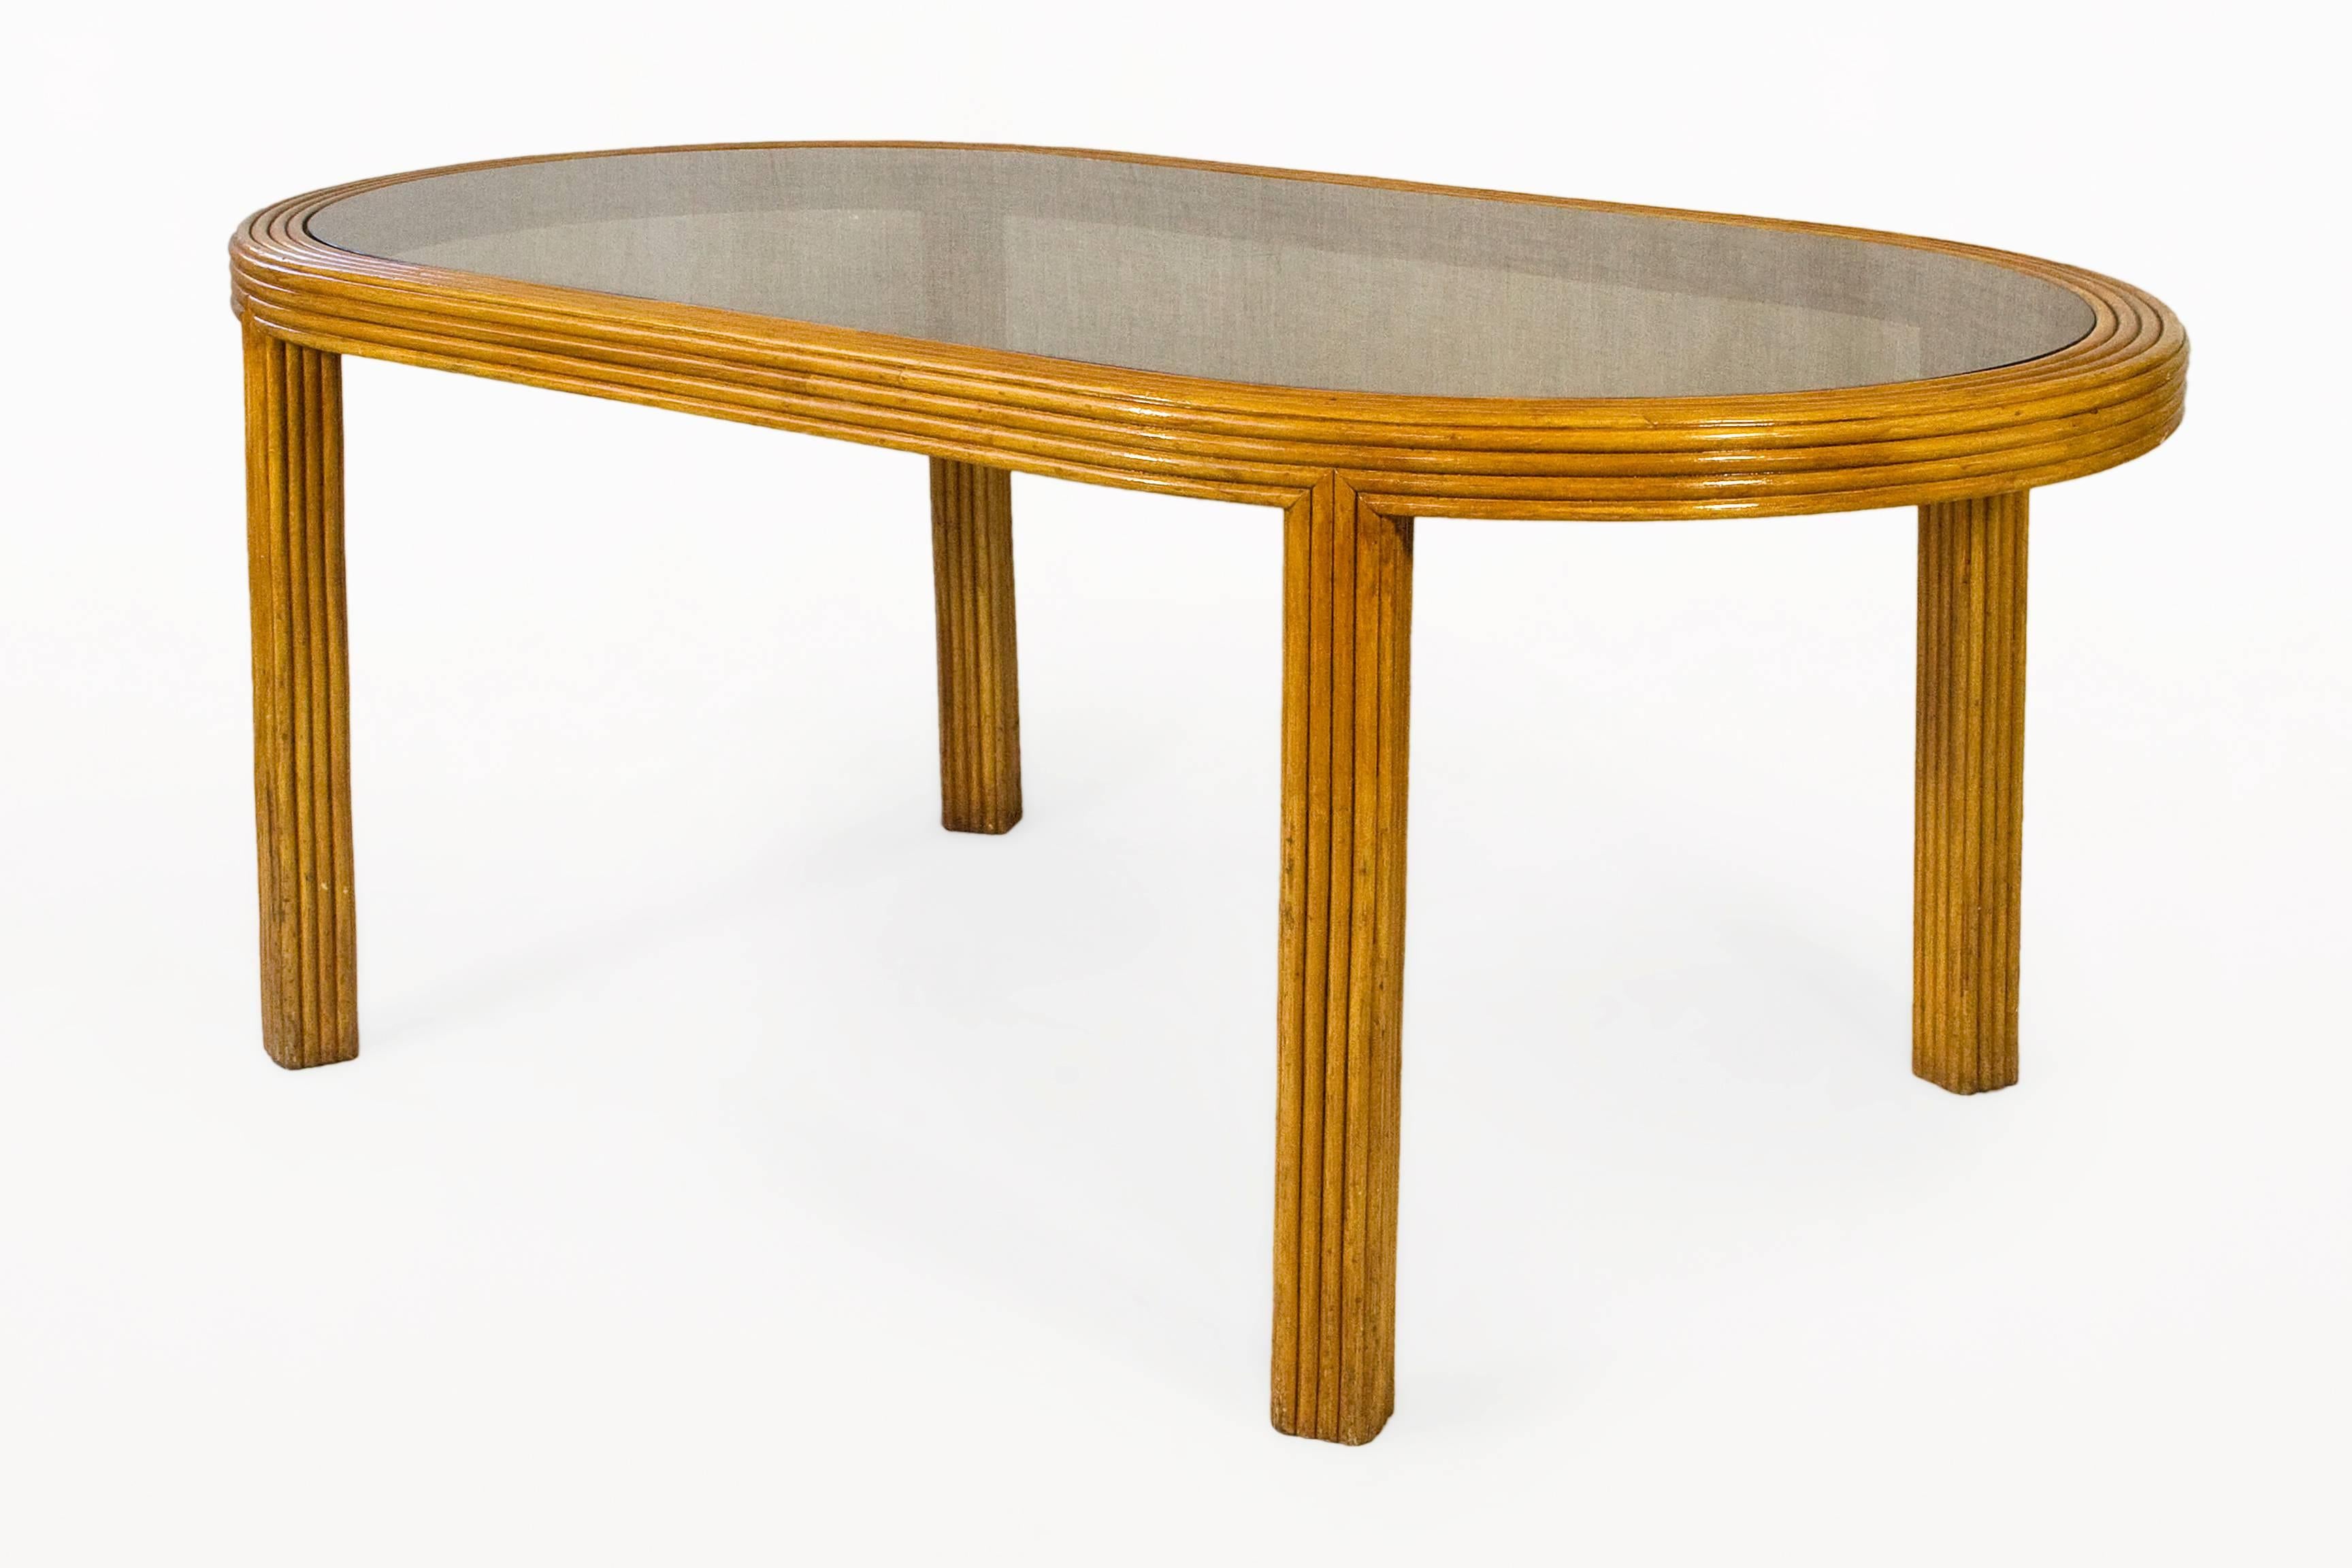 Bamboo and glass dining table in the style of Gabriella Crespi.
Oval design.
Slightly smoked glass top,
circa 1970, France.
Very good vintage condition.